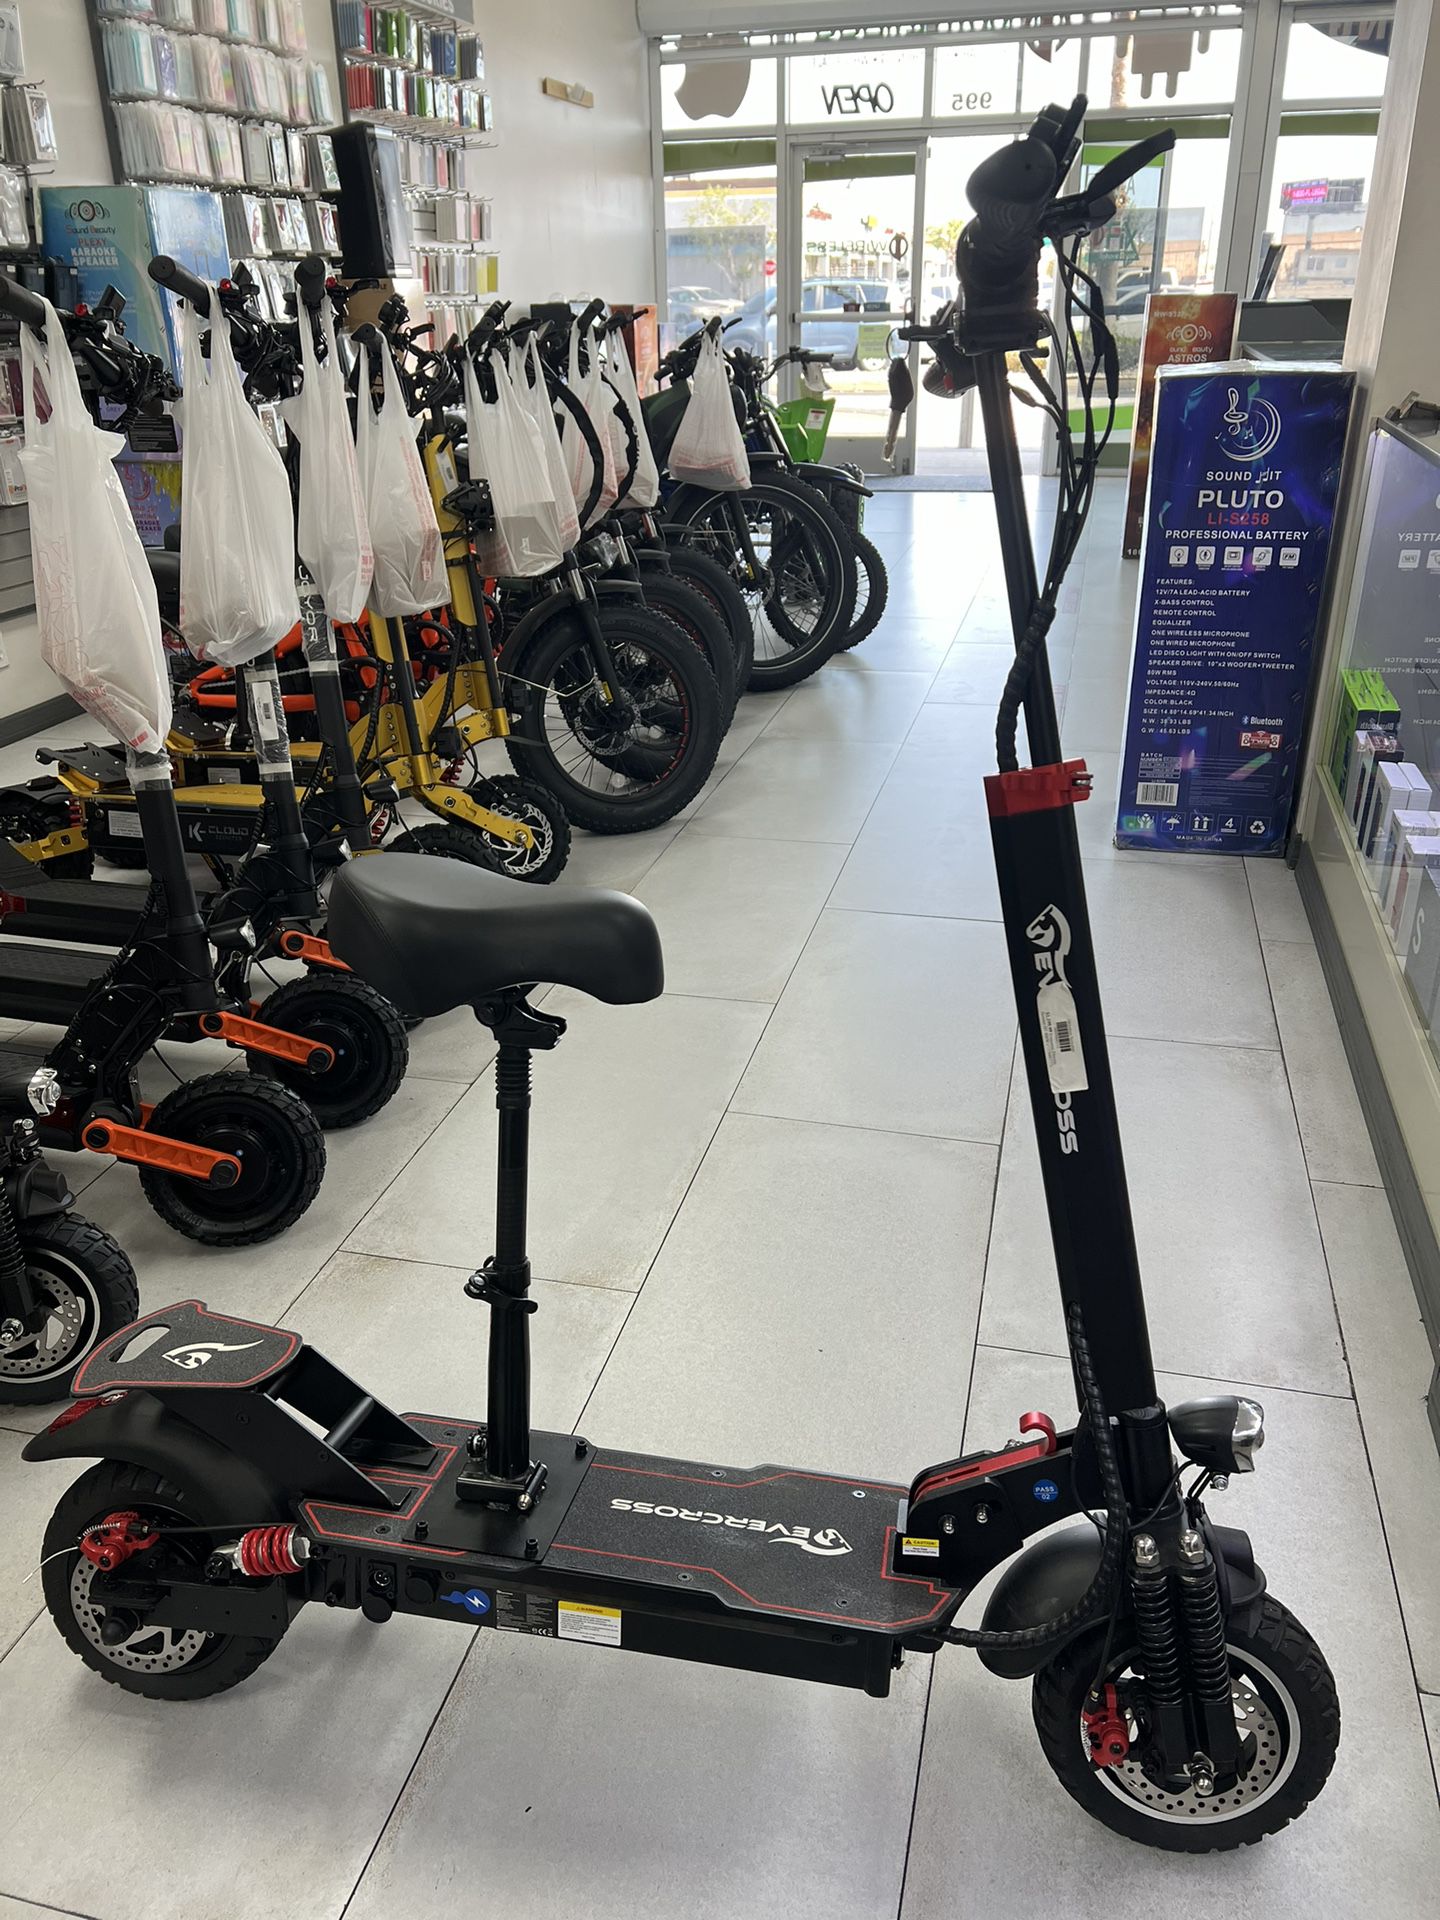 EverCross H7 Scooter! 28mph! Finance For $50 Down Payment!!